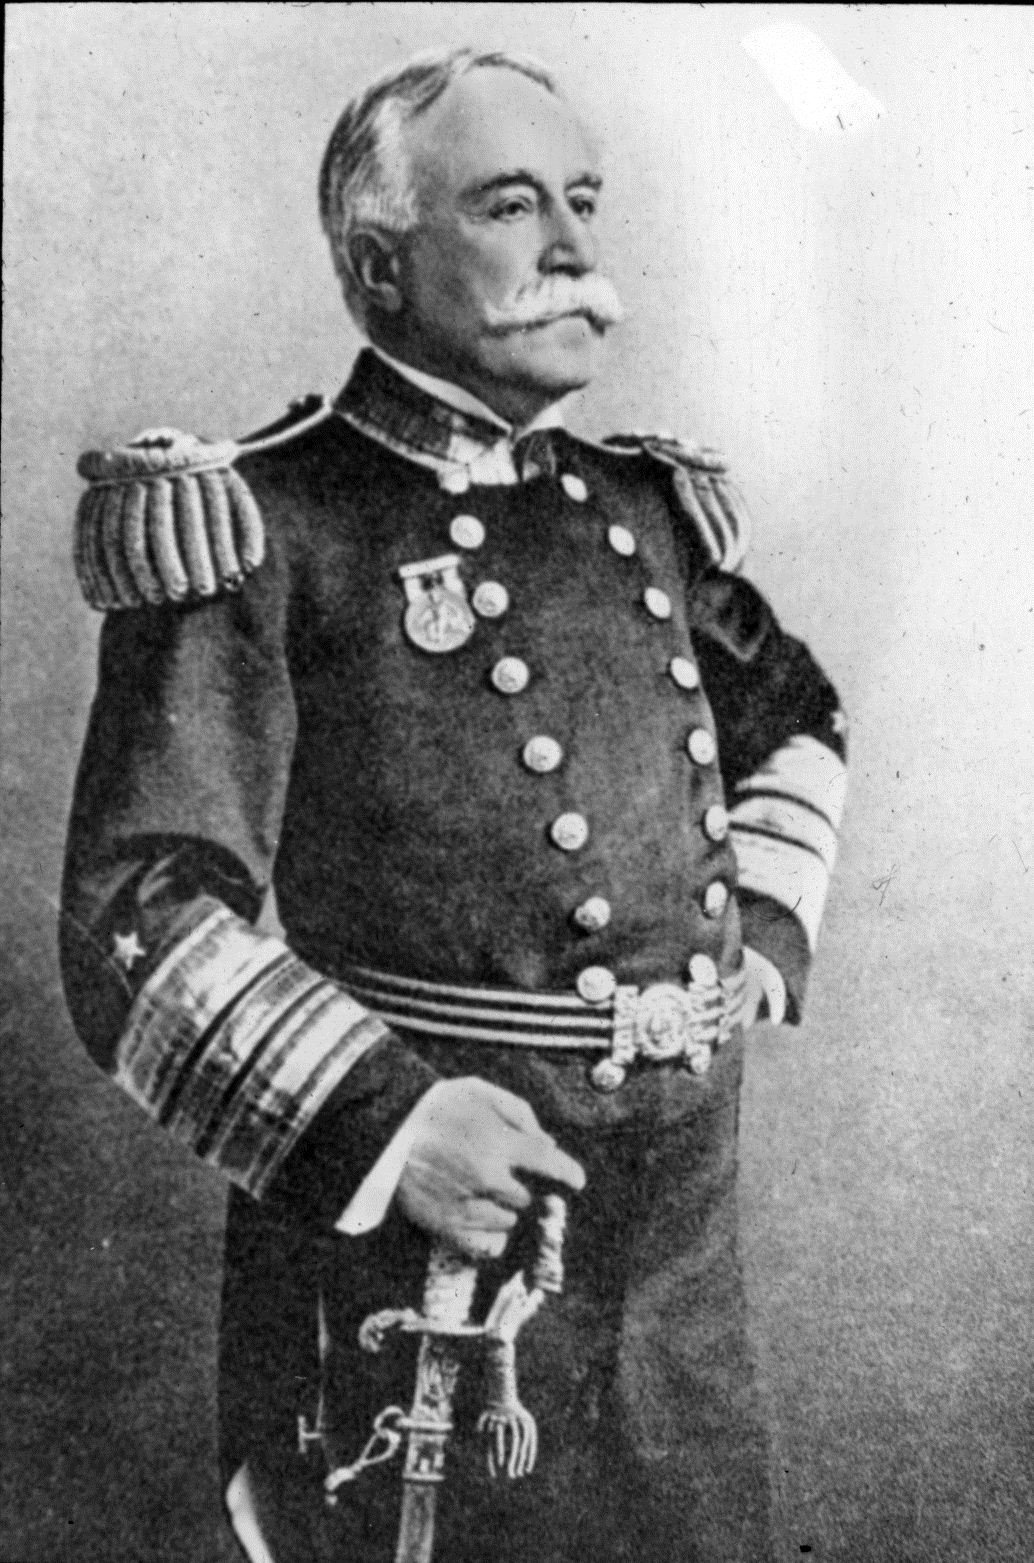 Admiral George Dewey, based in Hong Kong, was given the order to engage the Spanish fleet at Manila in the Philippines.